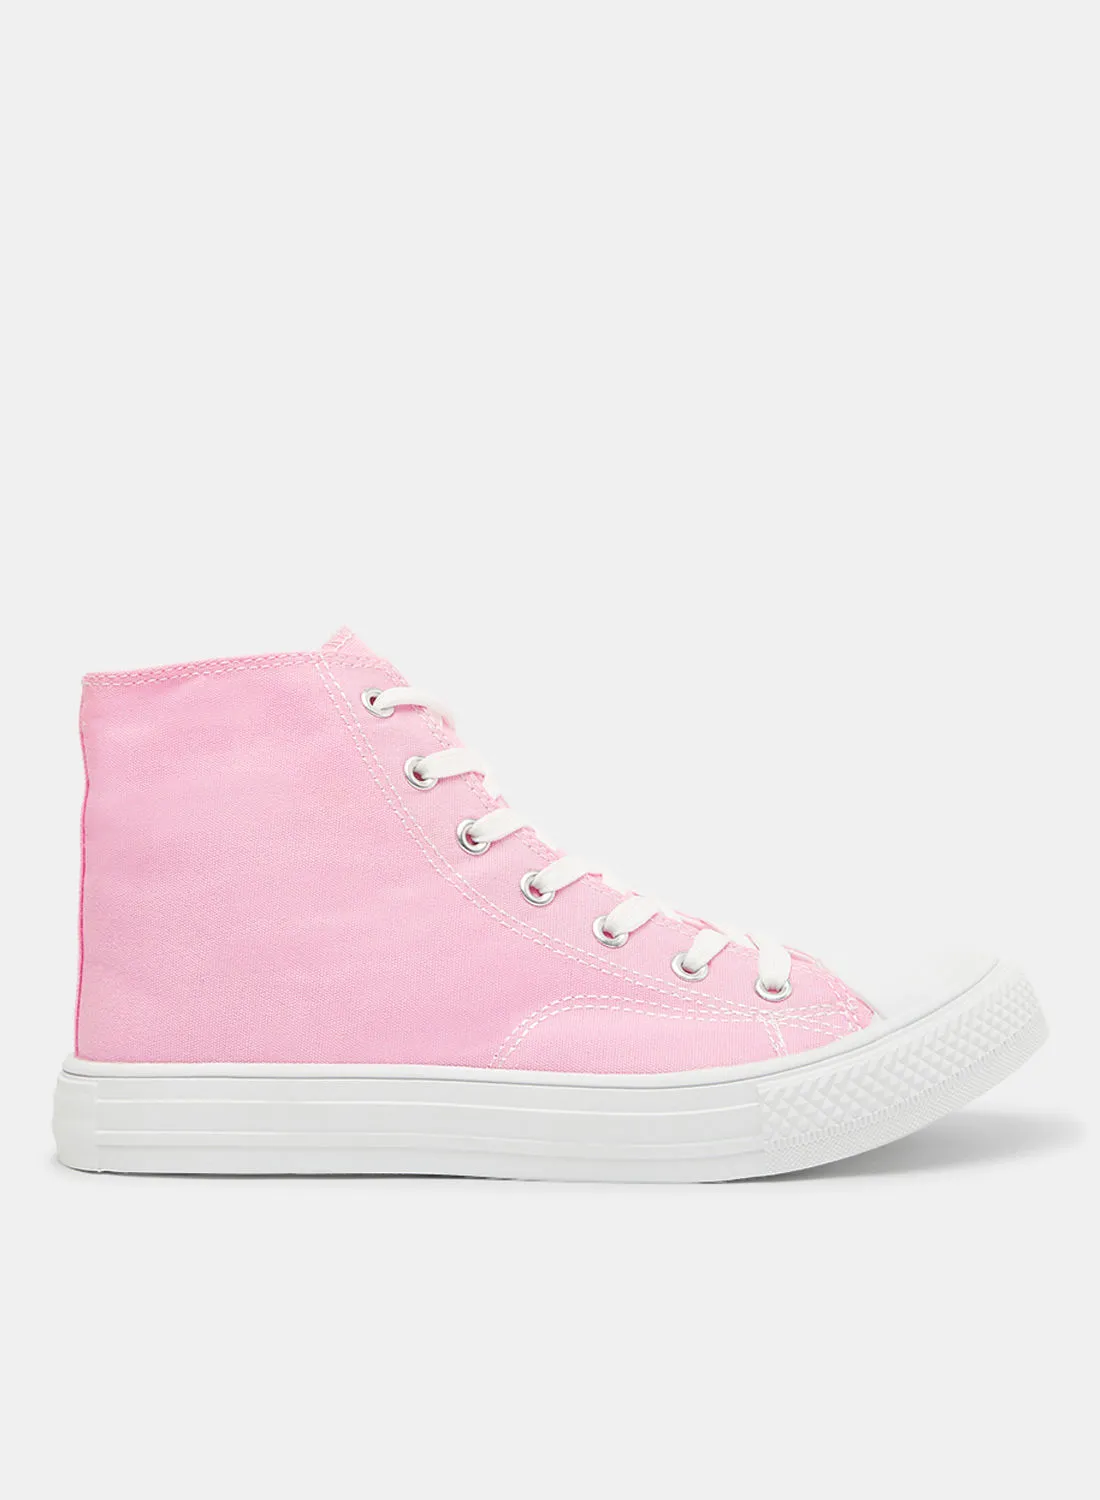 LABEL RAIL High Top Canvas Sneakers Pink